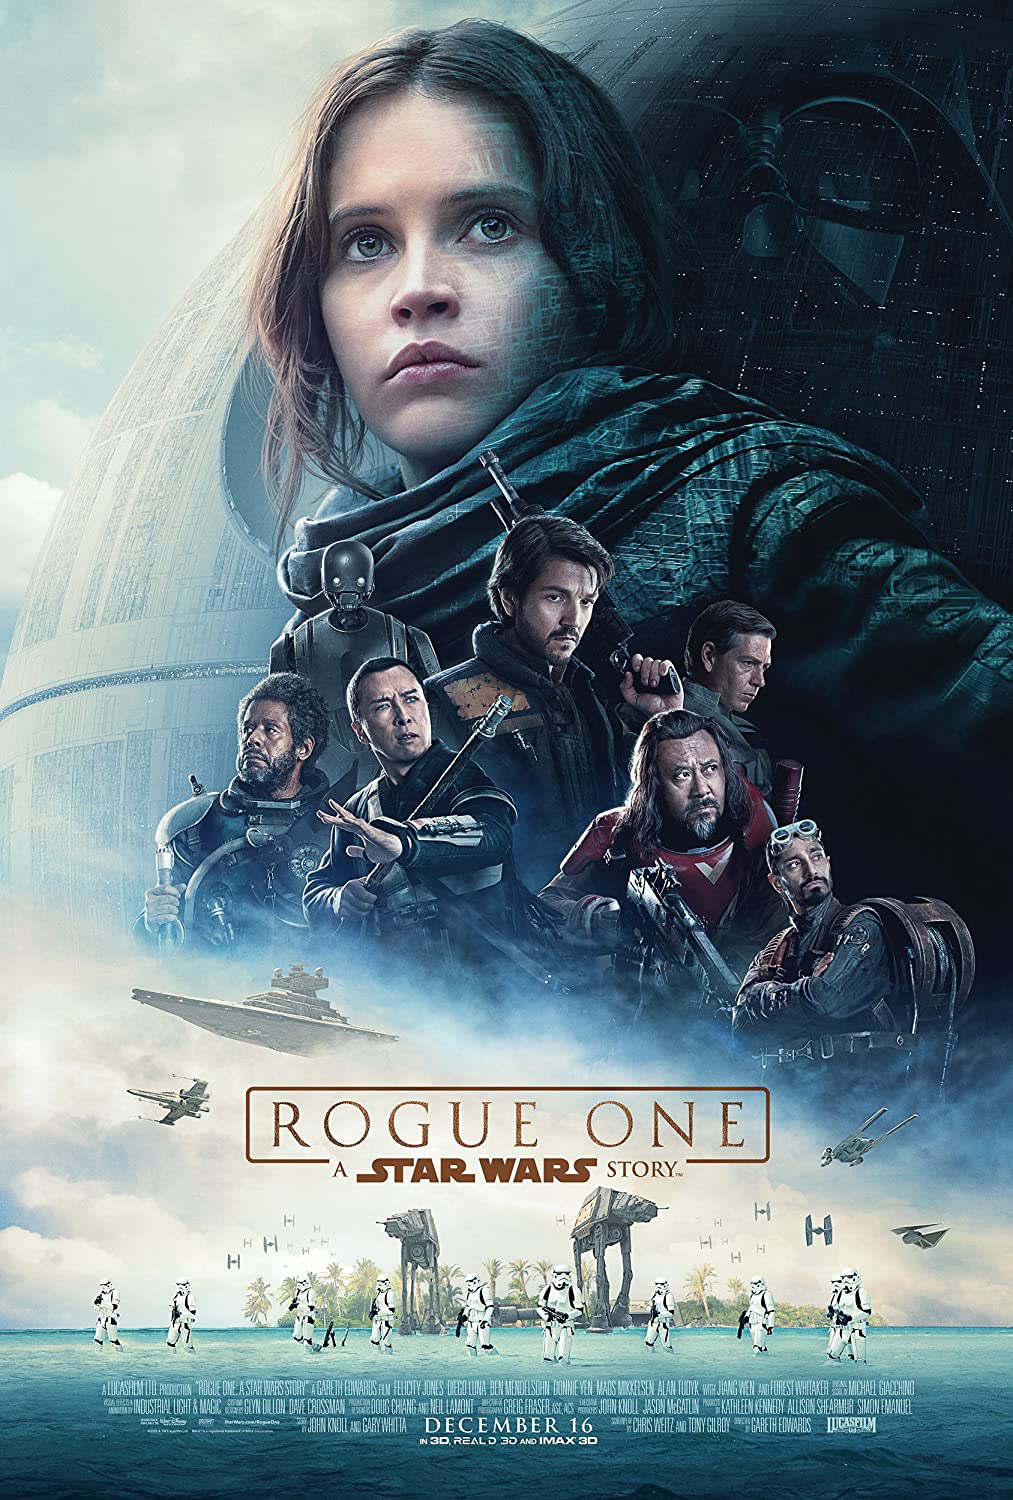 Poster Phim Rogue One: Star Wars Ngoại Truyện (Rogue One: A Star Wars Story)